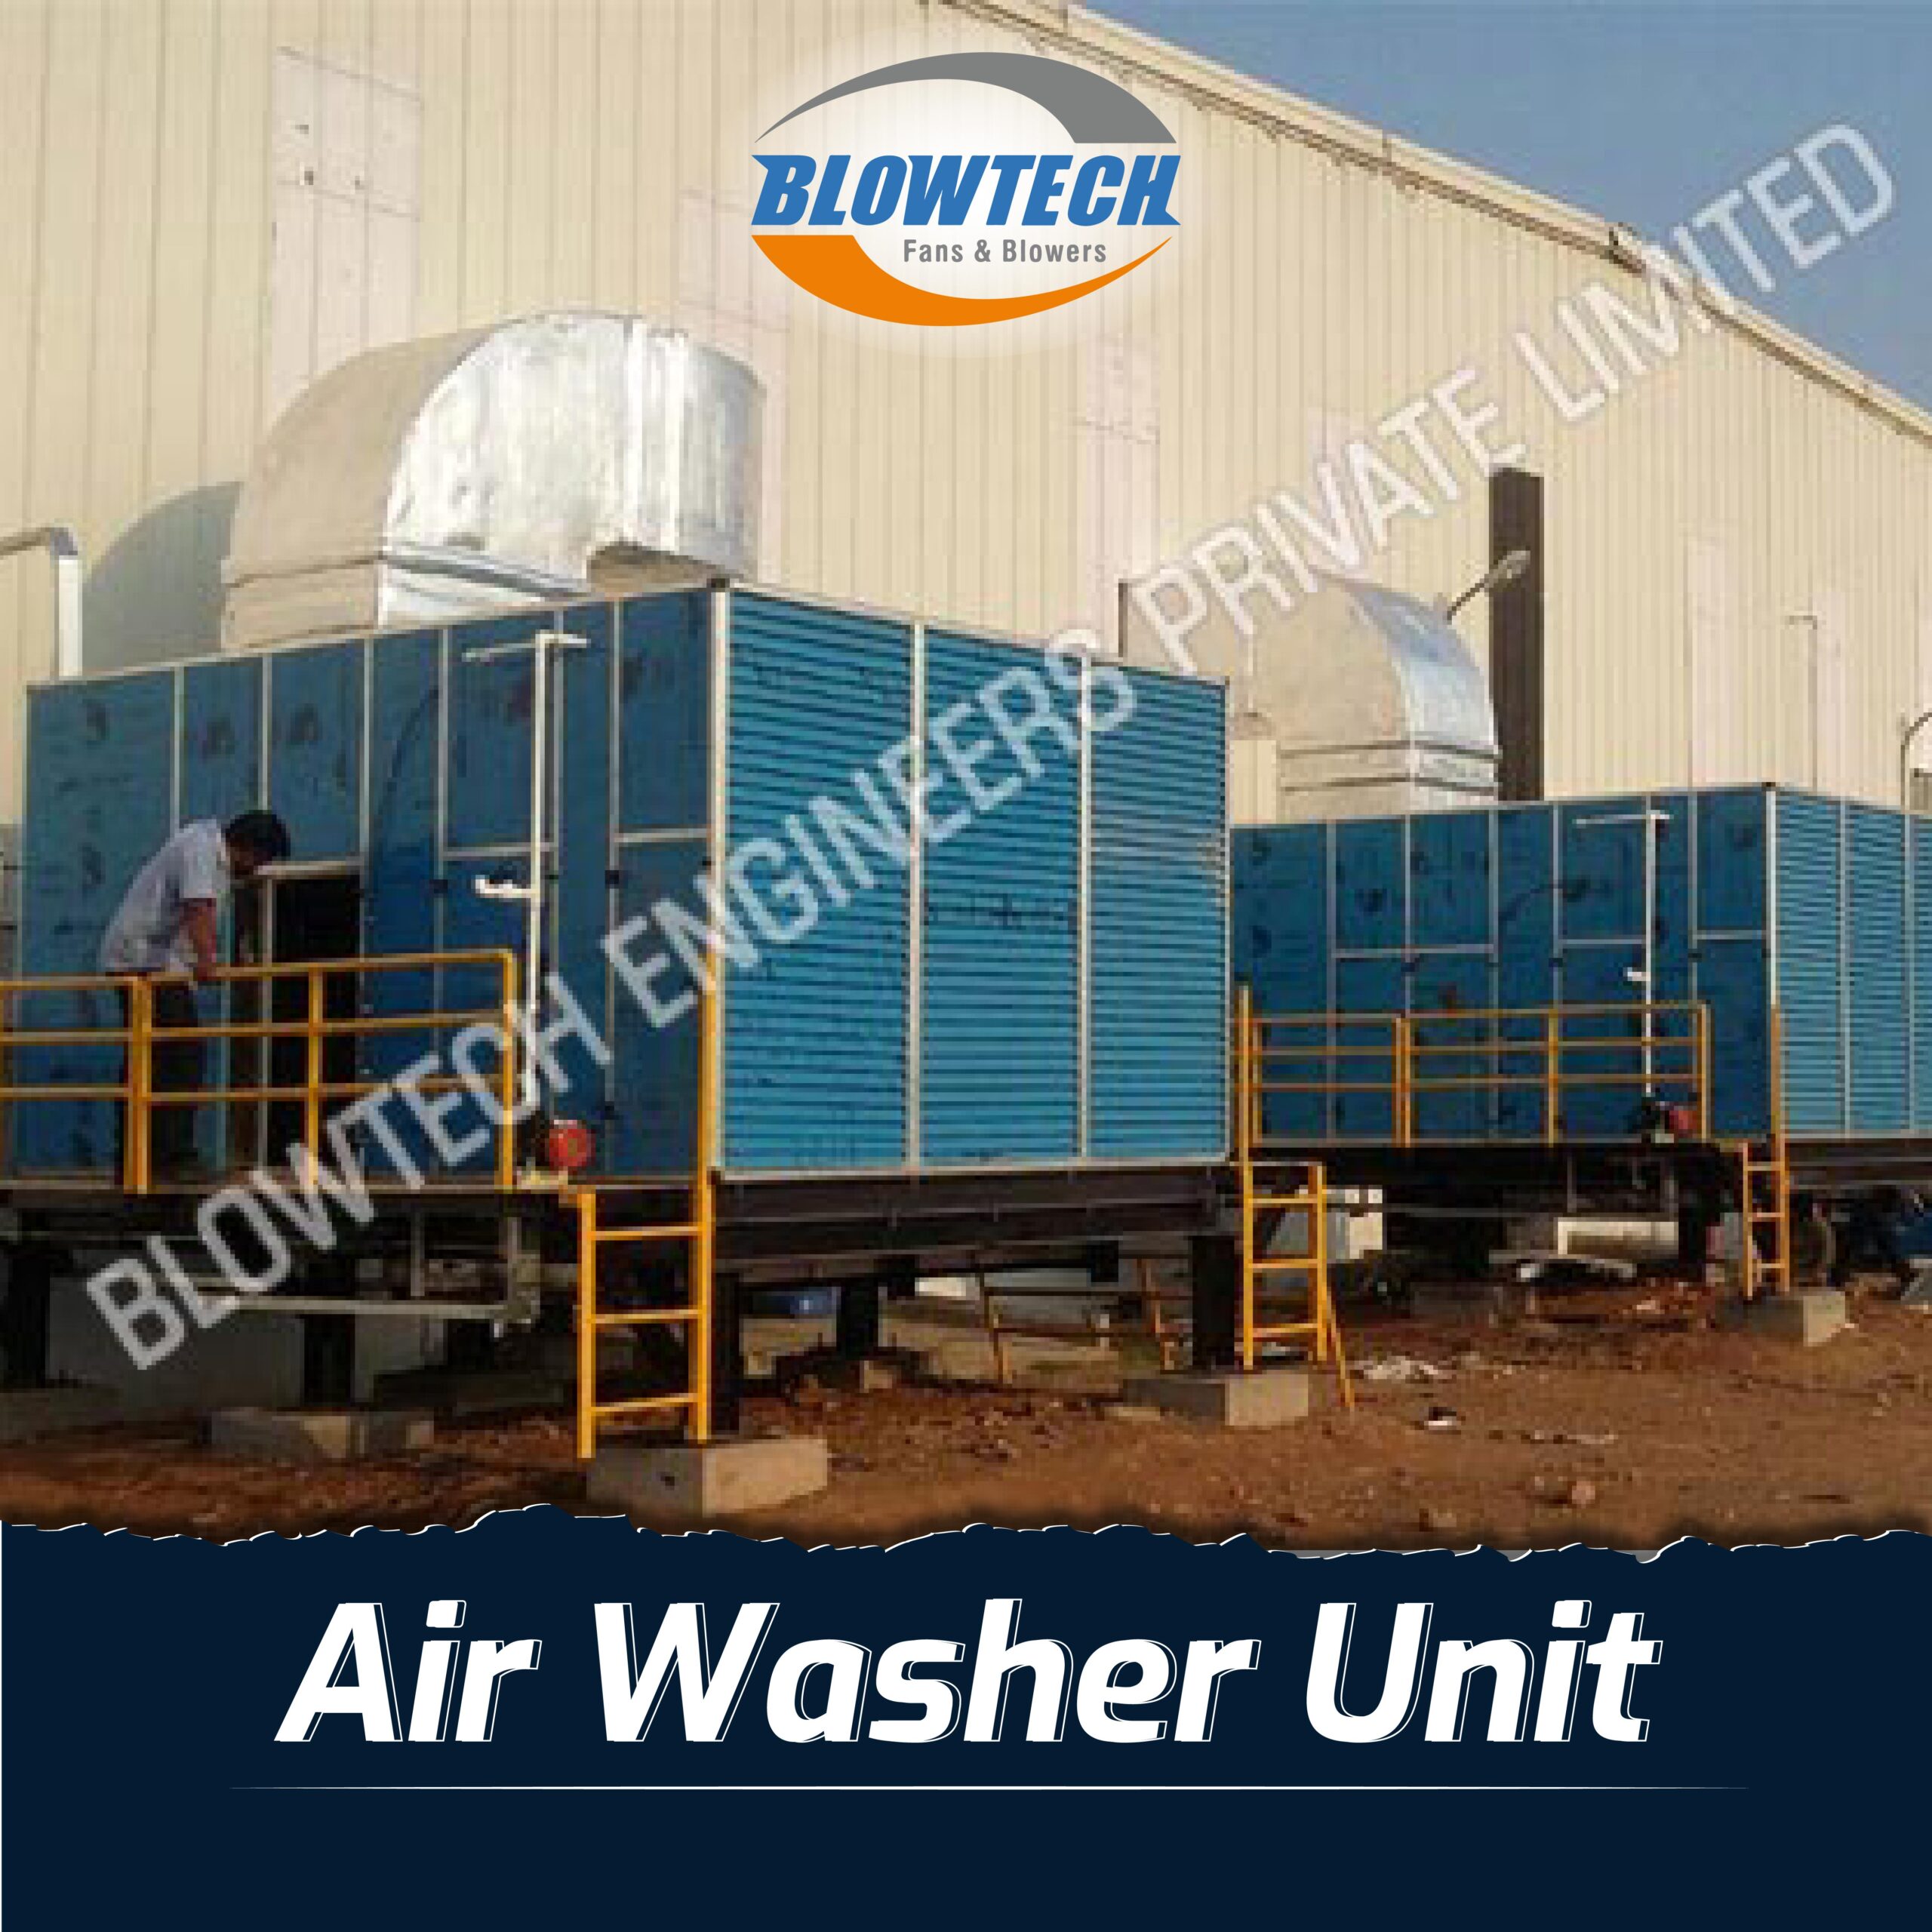 Air Washer Unit  manufacturer, supplier and exporter in Mumbai, India